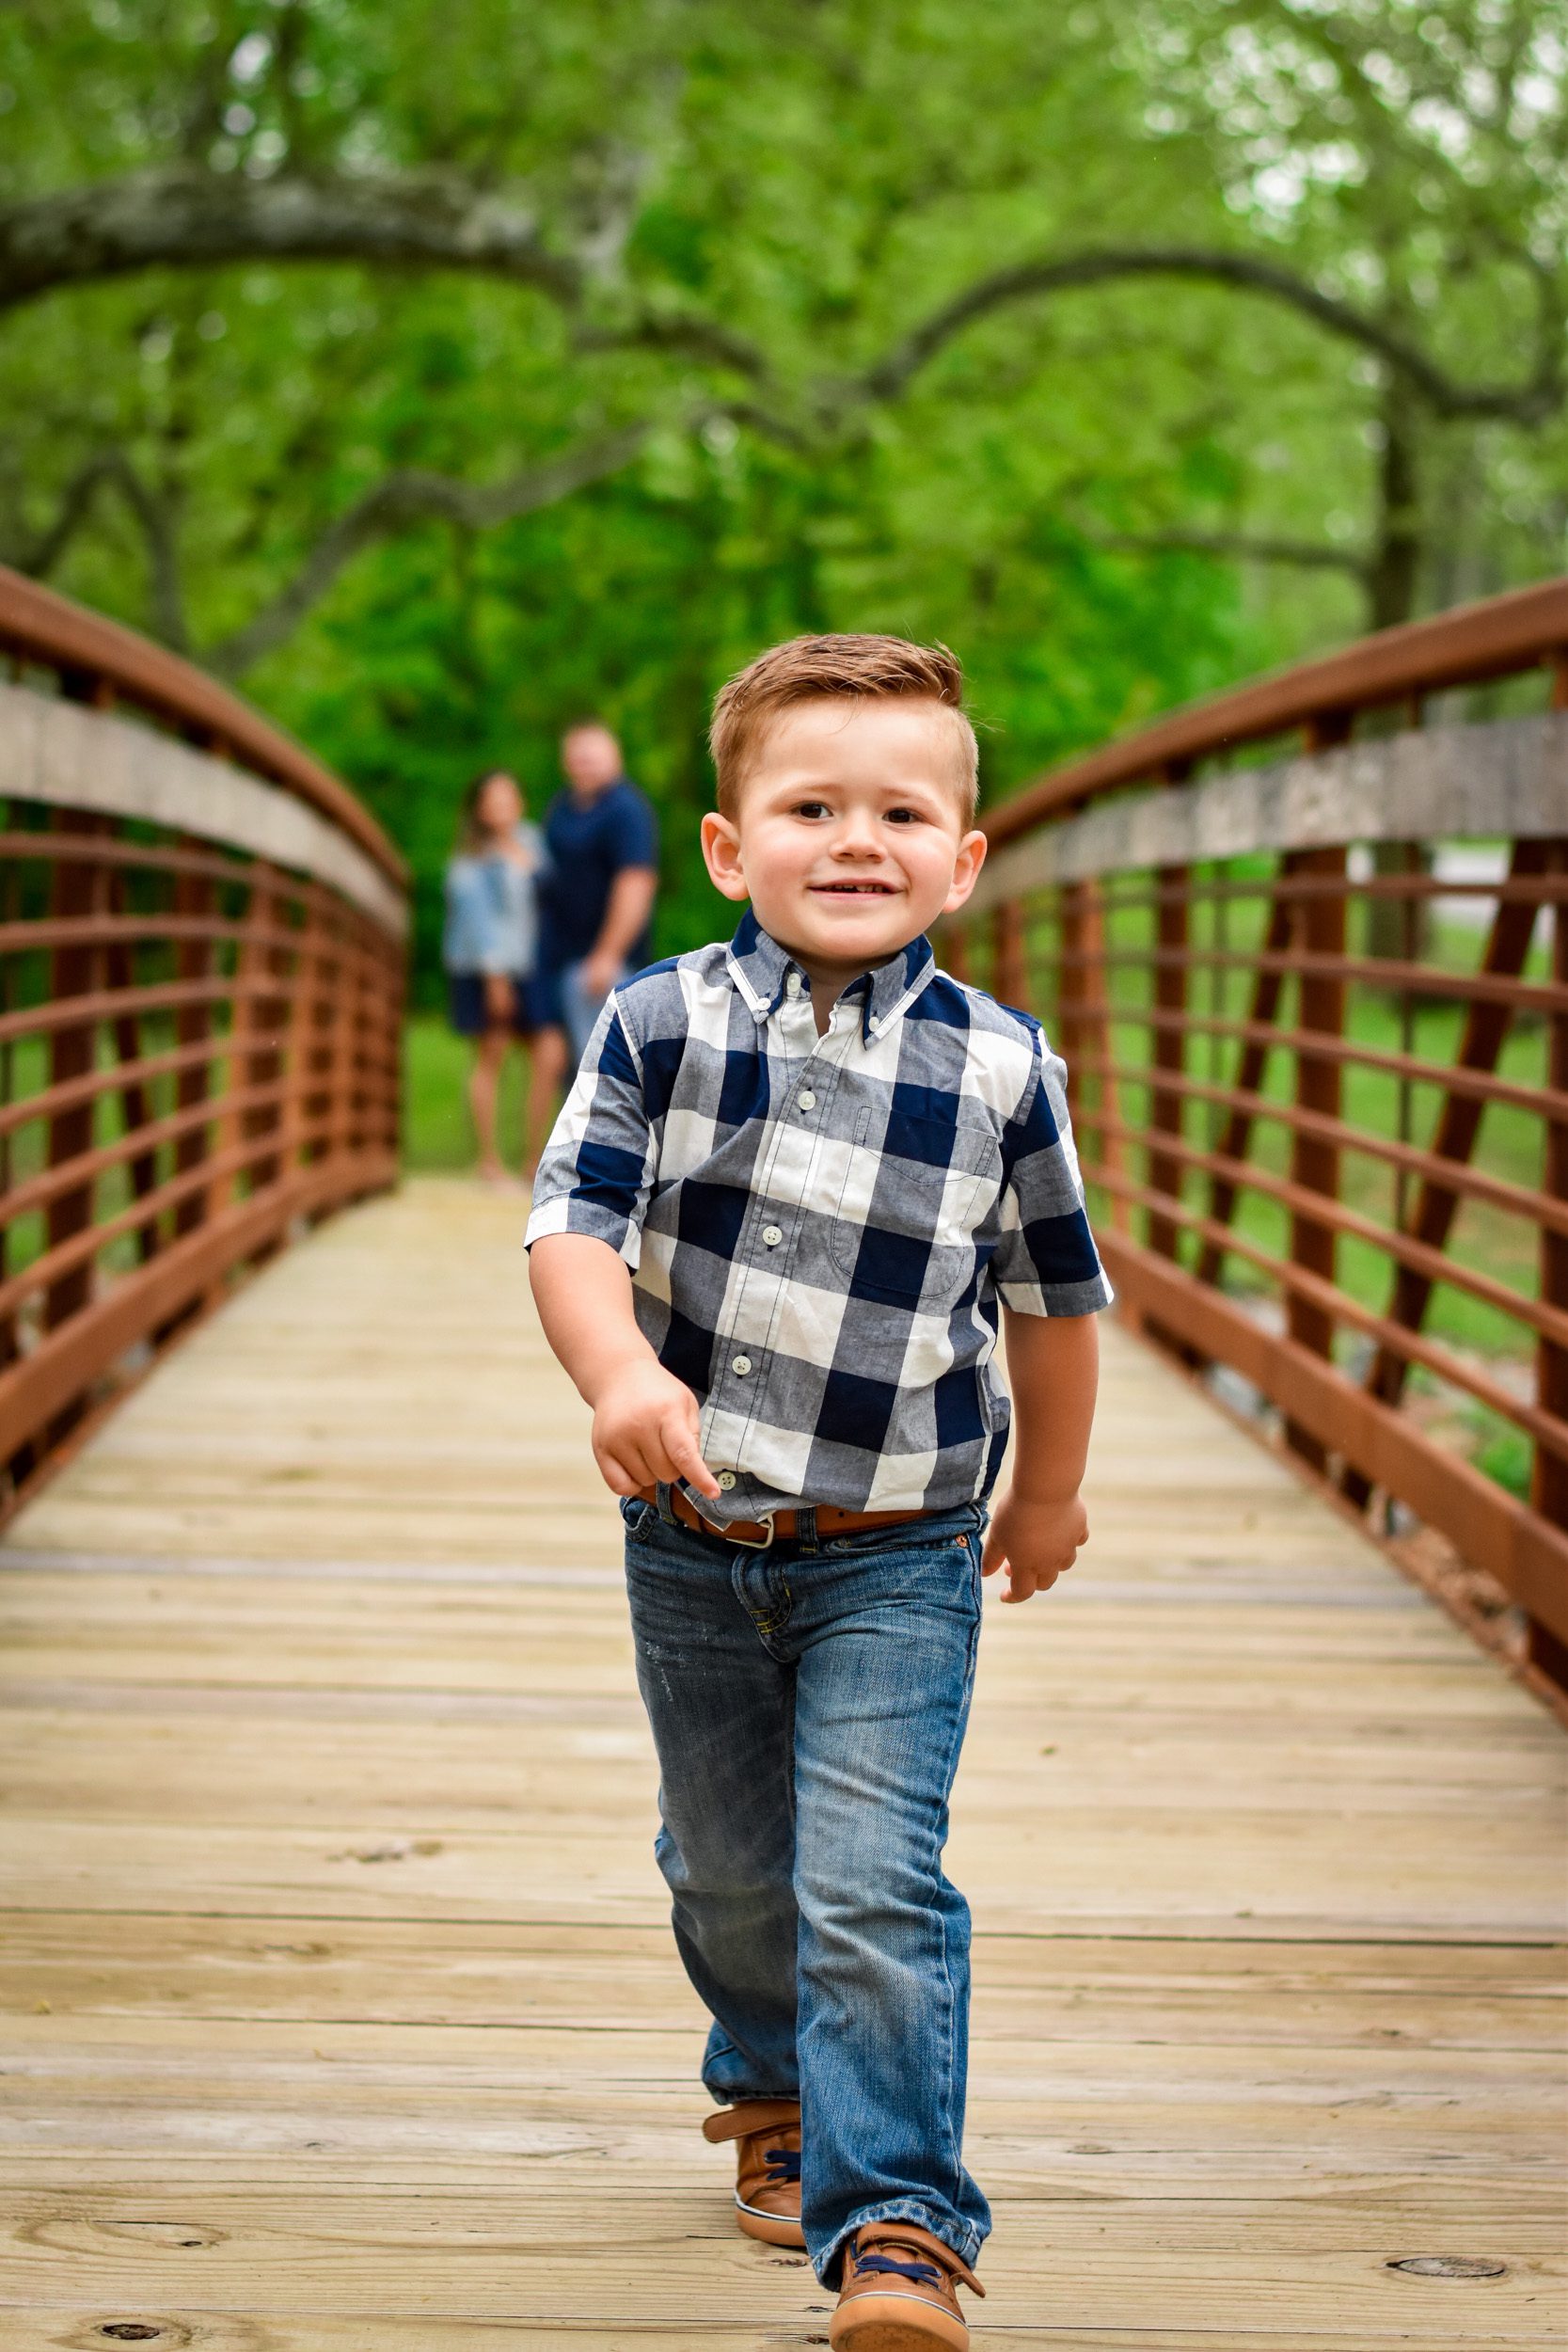 Family picture of a toddler walking across a bridge with his parents watching him in the background